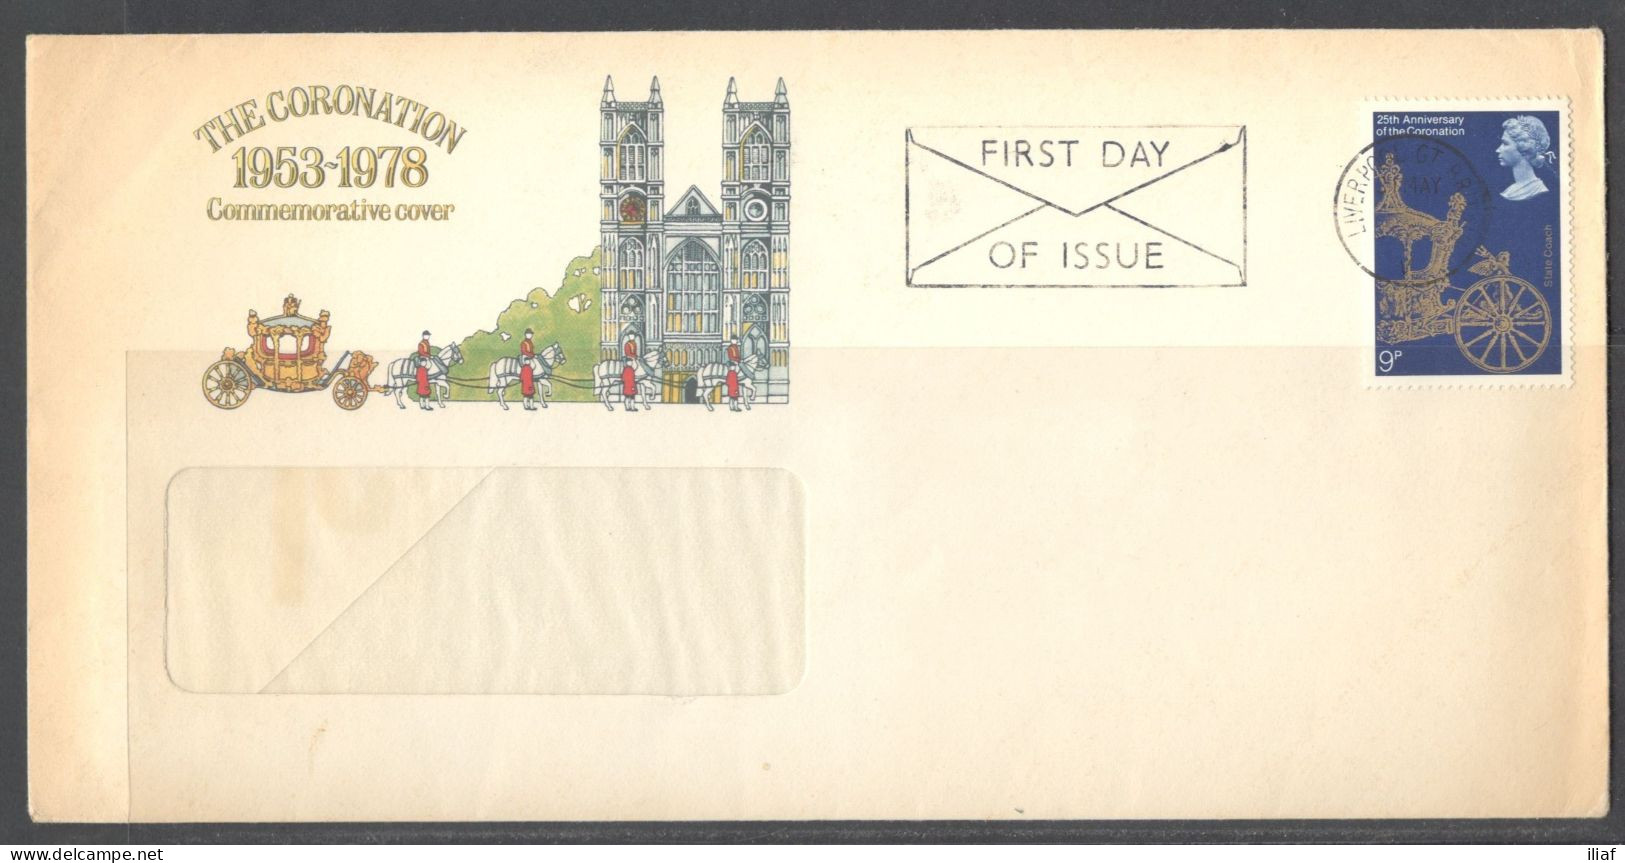 United Kingdom Of Great Britain. FDC Sc. 835.  25th Anniversary Of Coronation.  FDC Cancellation On FDC Envelope - 1971-1980 Decimale  Uitgaven